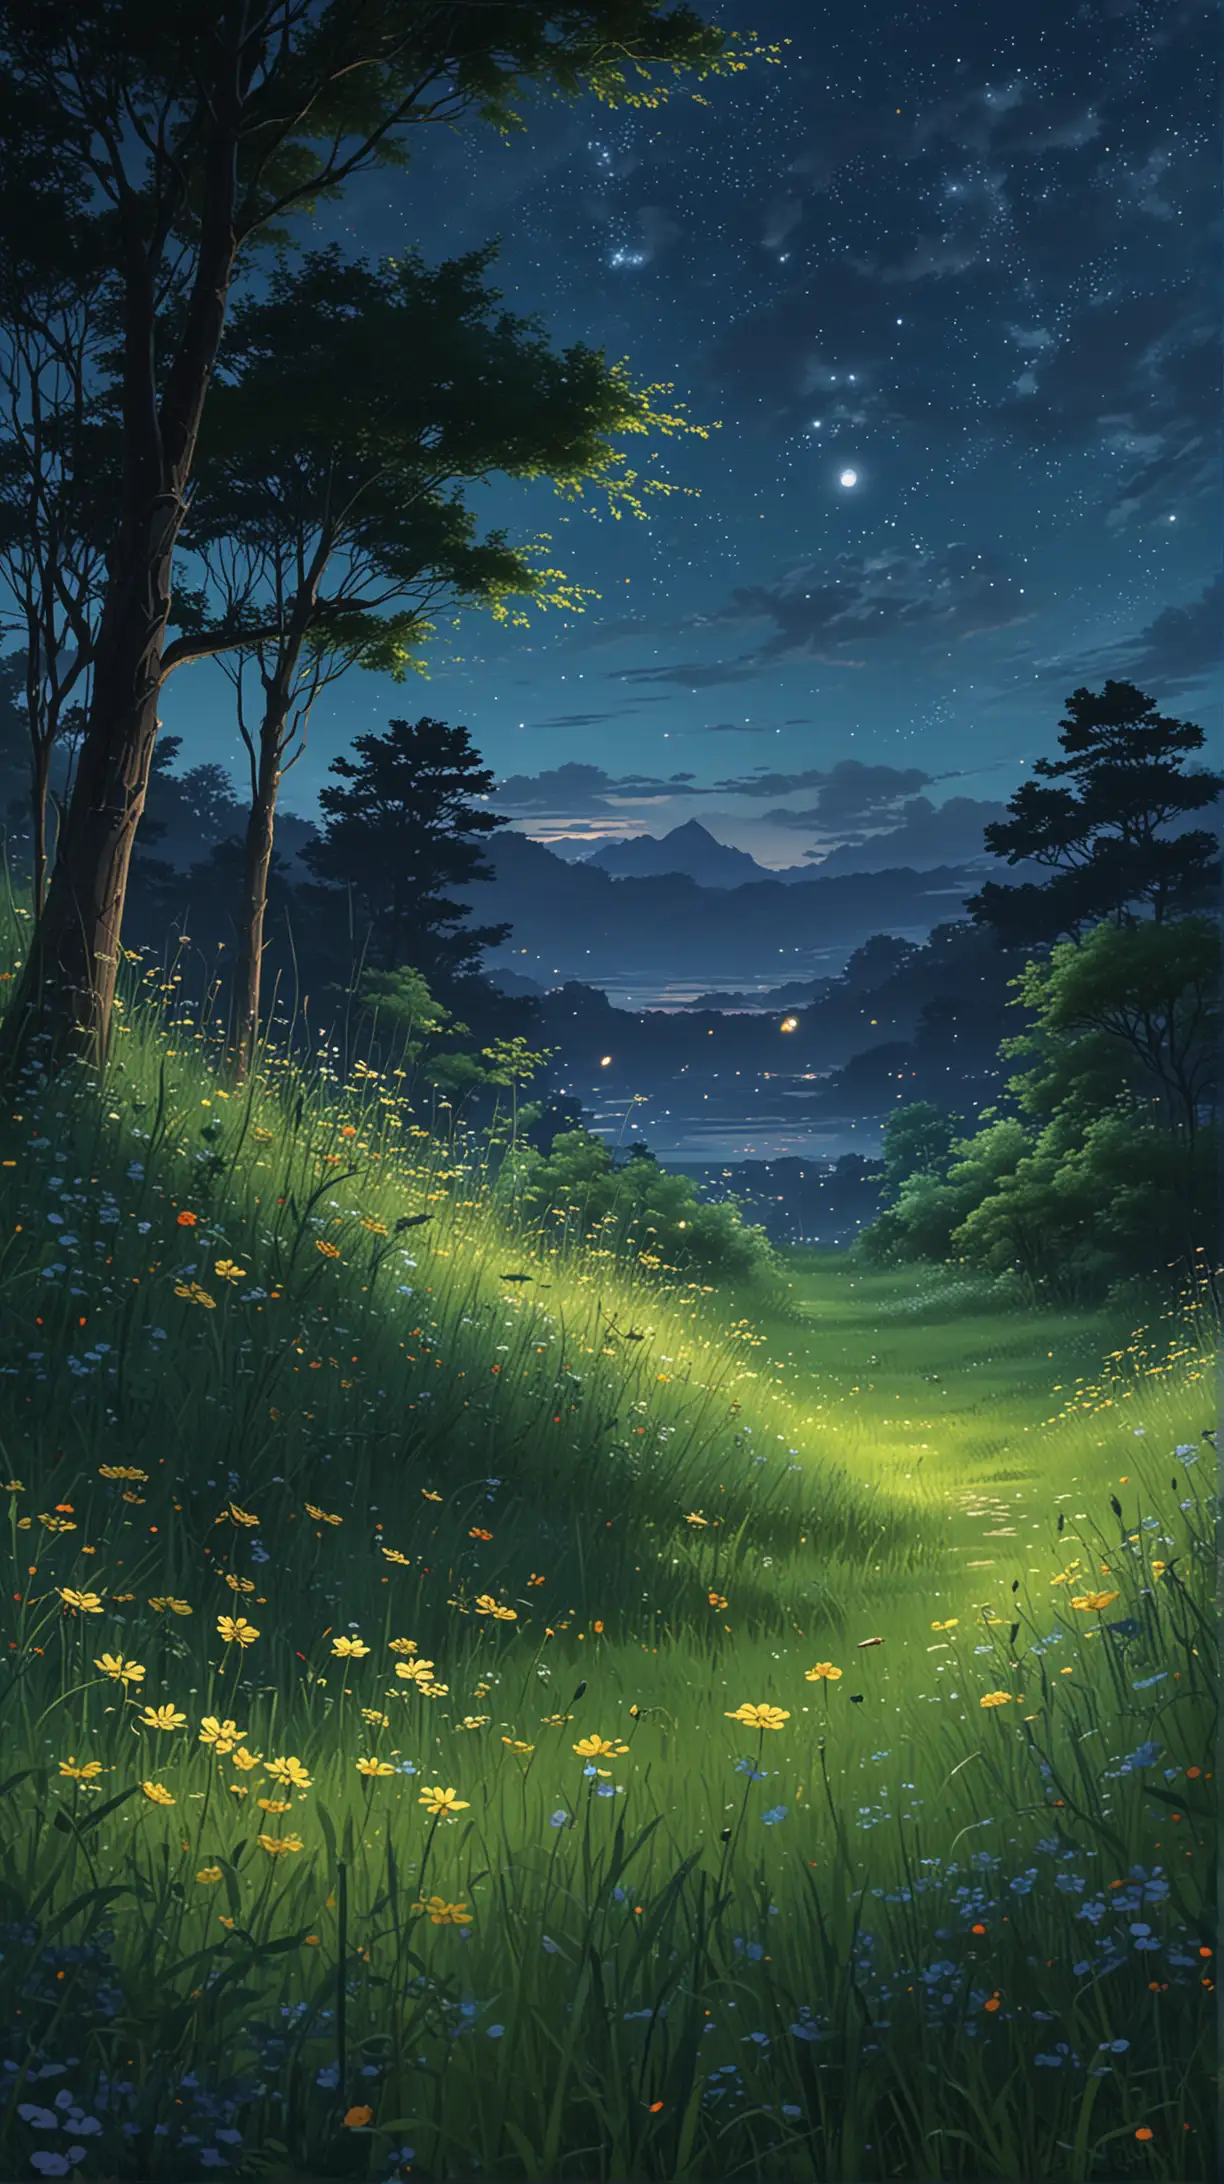 Majestic Night Sky Meadow with Fireflies and Vibrant Flowers